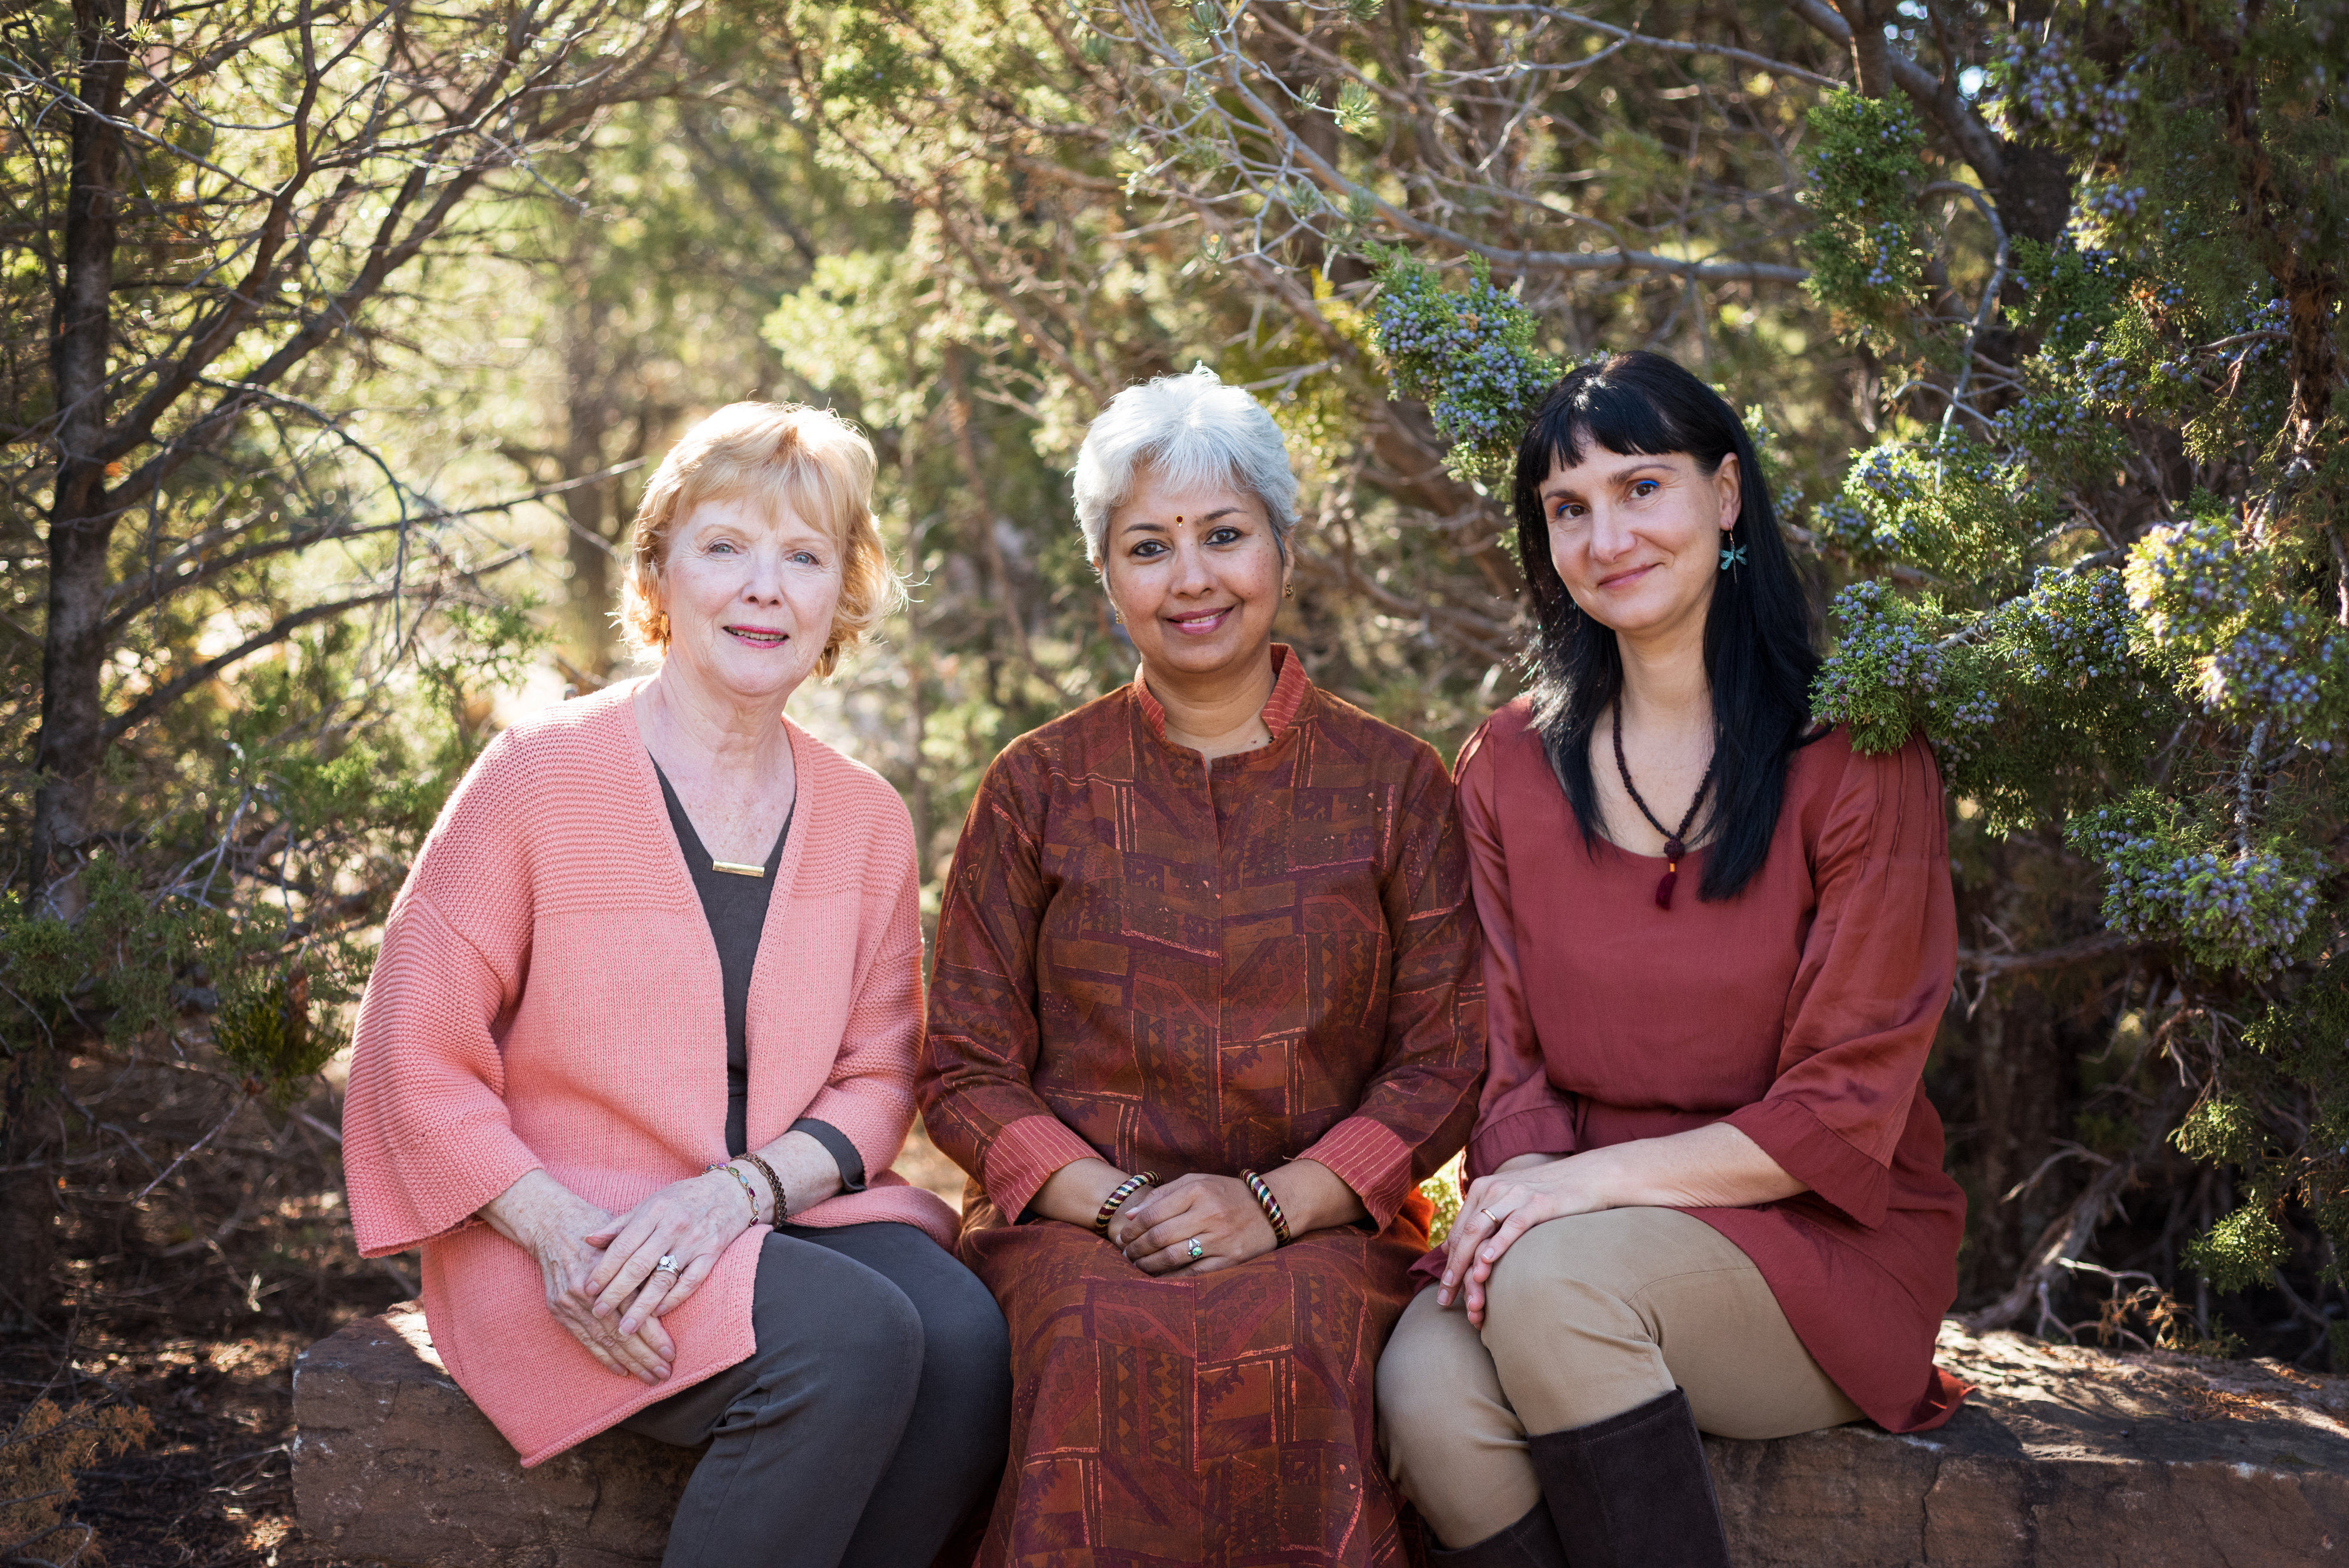 Grief counsellors Lo Anne Mayer, Uma Girish and Daniela Norris. Photo: International Grief Council